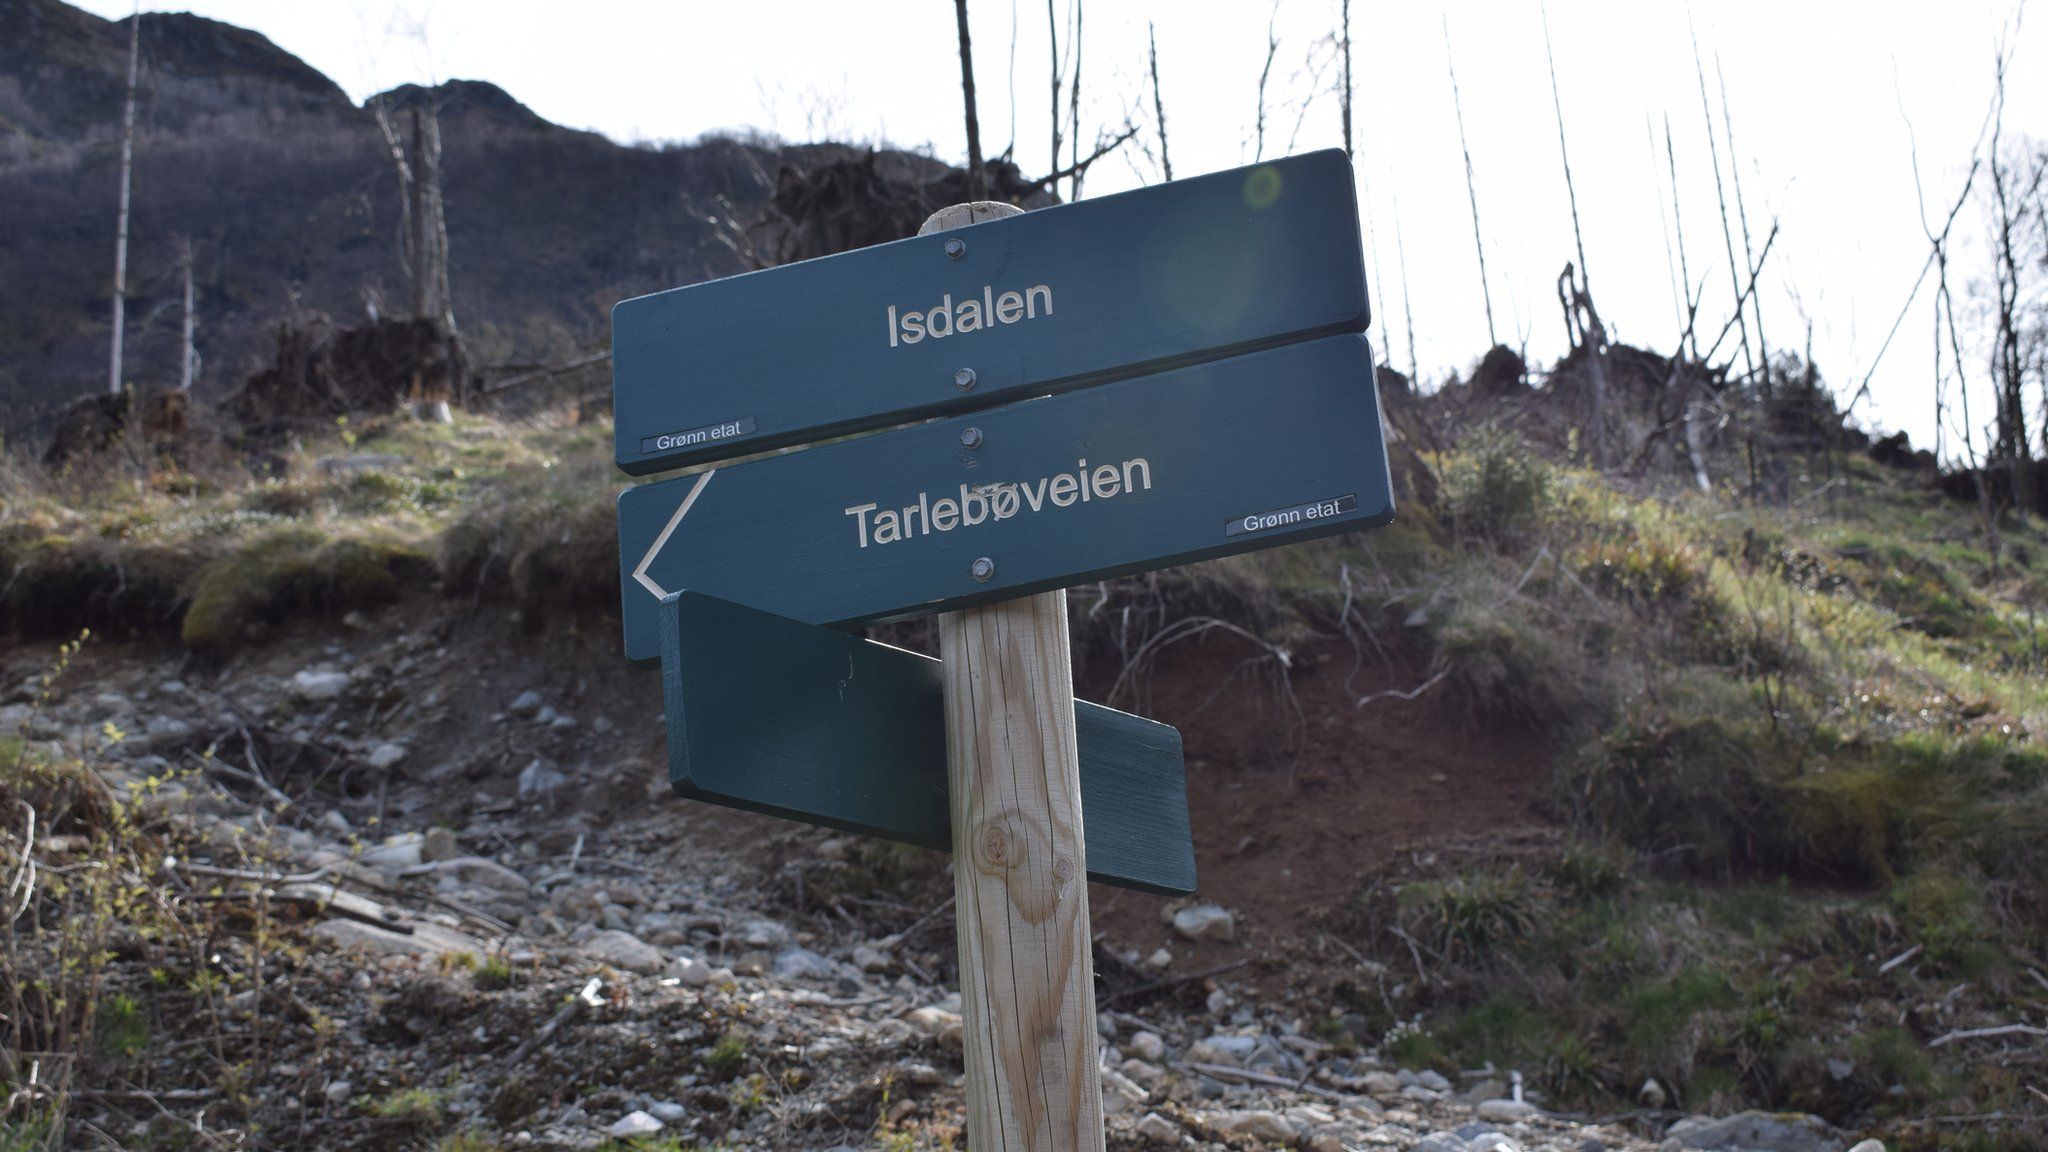 A sign in the valley reads: "Isdalen"